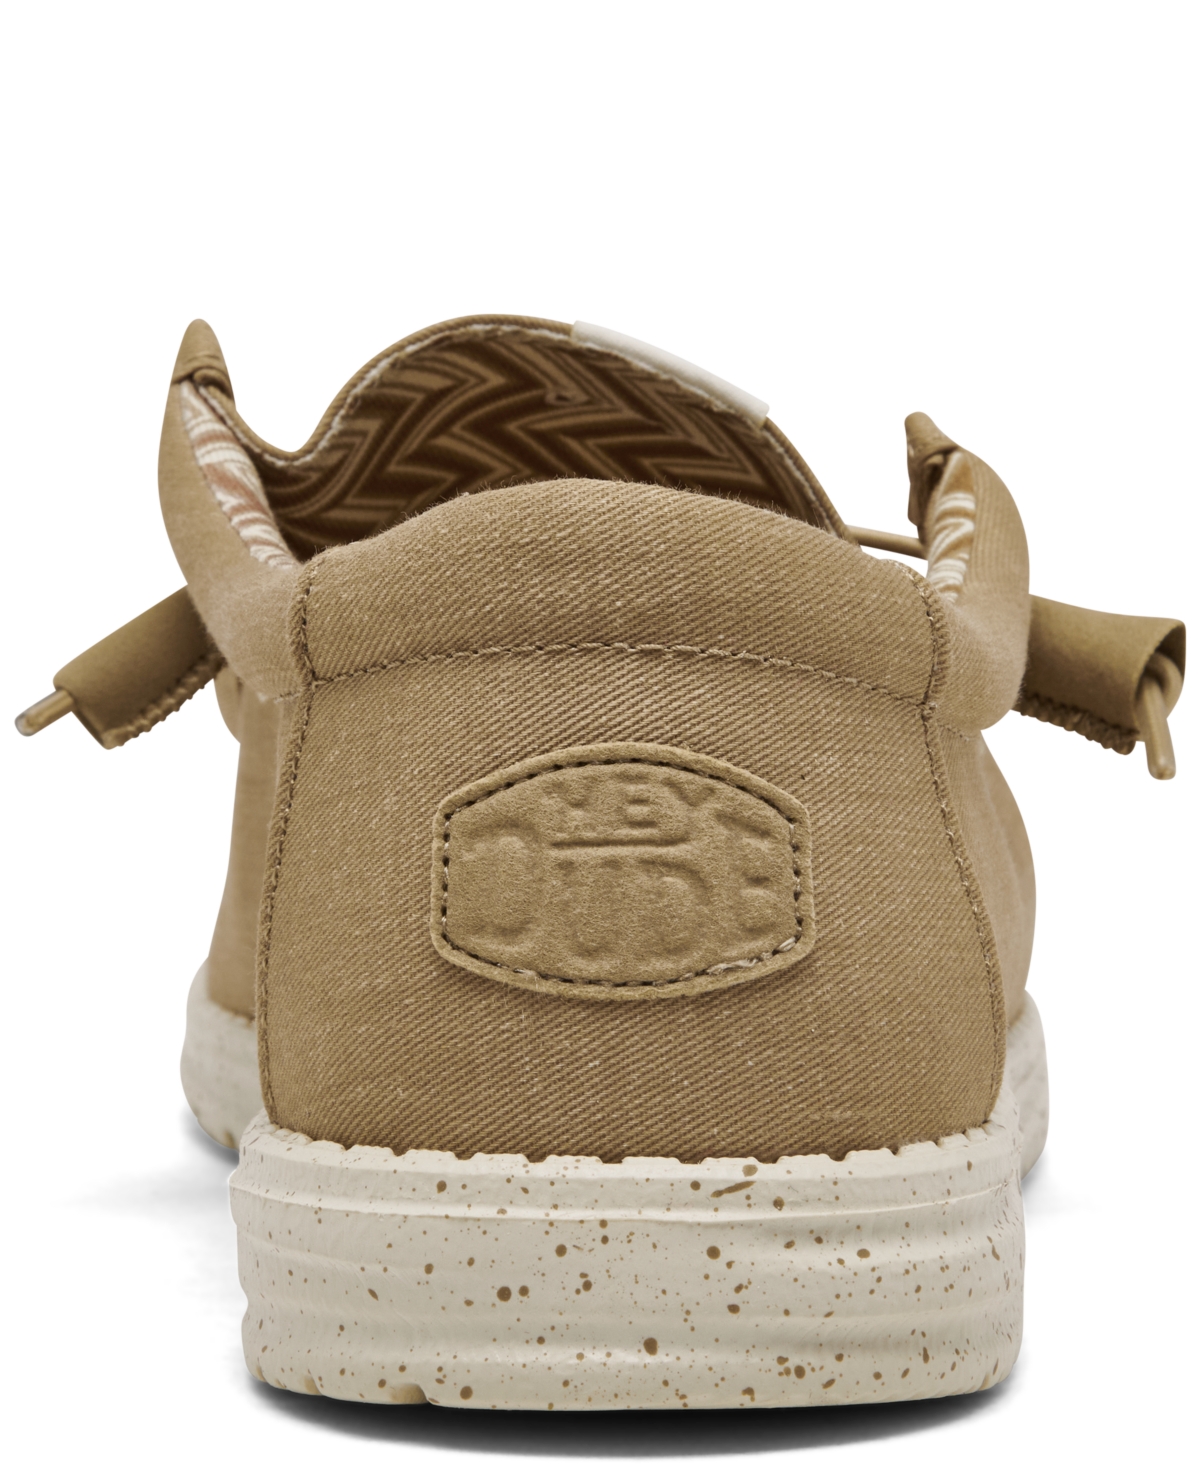 Shop Hey Dude Men's Wally Canvas Casual Moccasin Sneakers From Finish Line In Tan Khaki